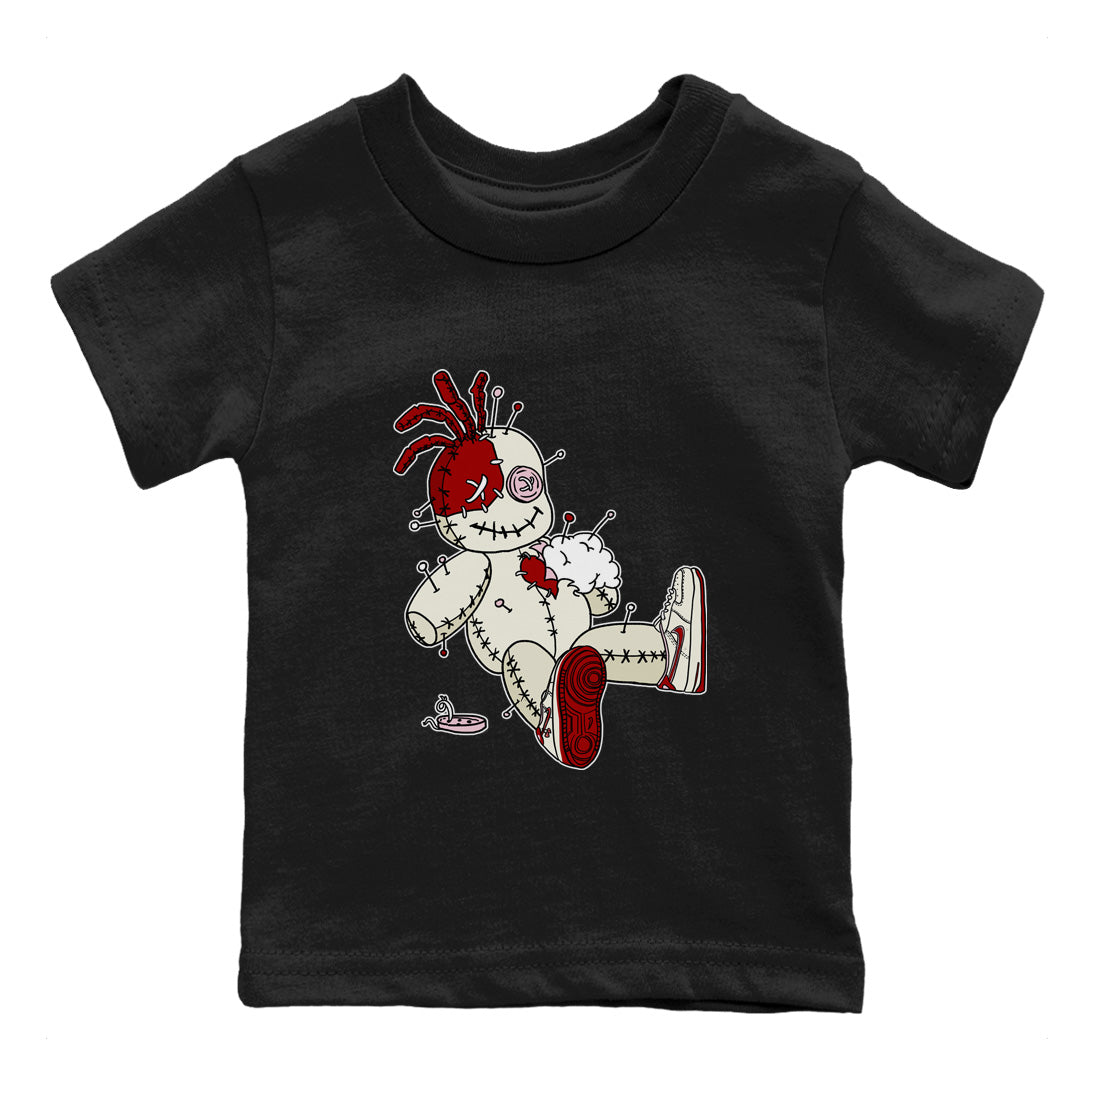 Air Force 1 Valentines Day Sneaker Match Tees Voodoo Doll Sneaker Tees Air Force 1 Valentines Day Sneaker Release Tees Kids Shirts